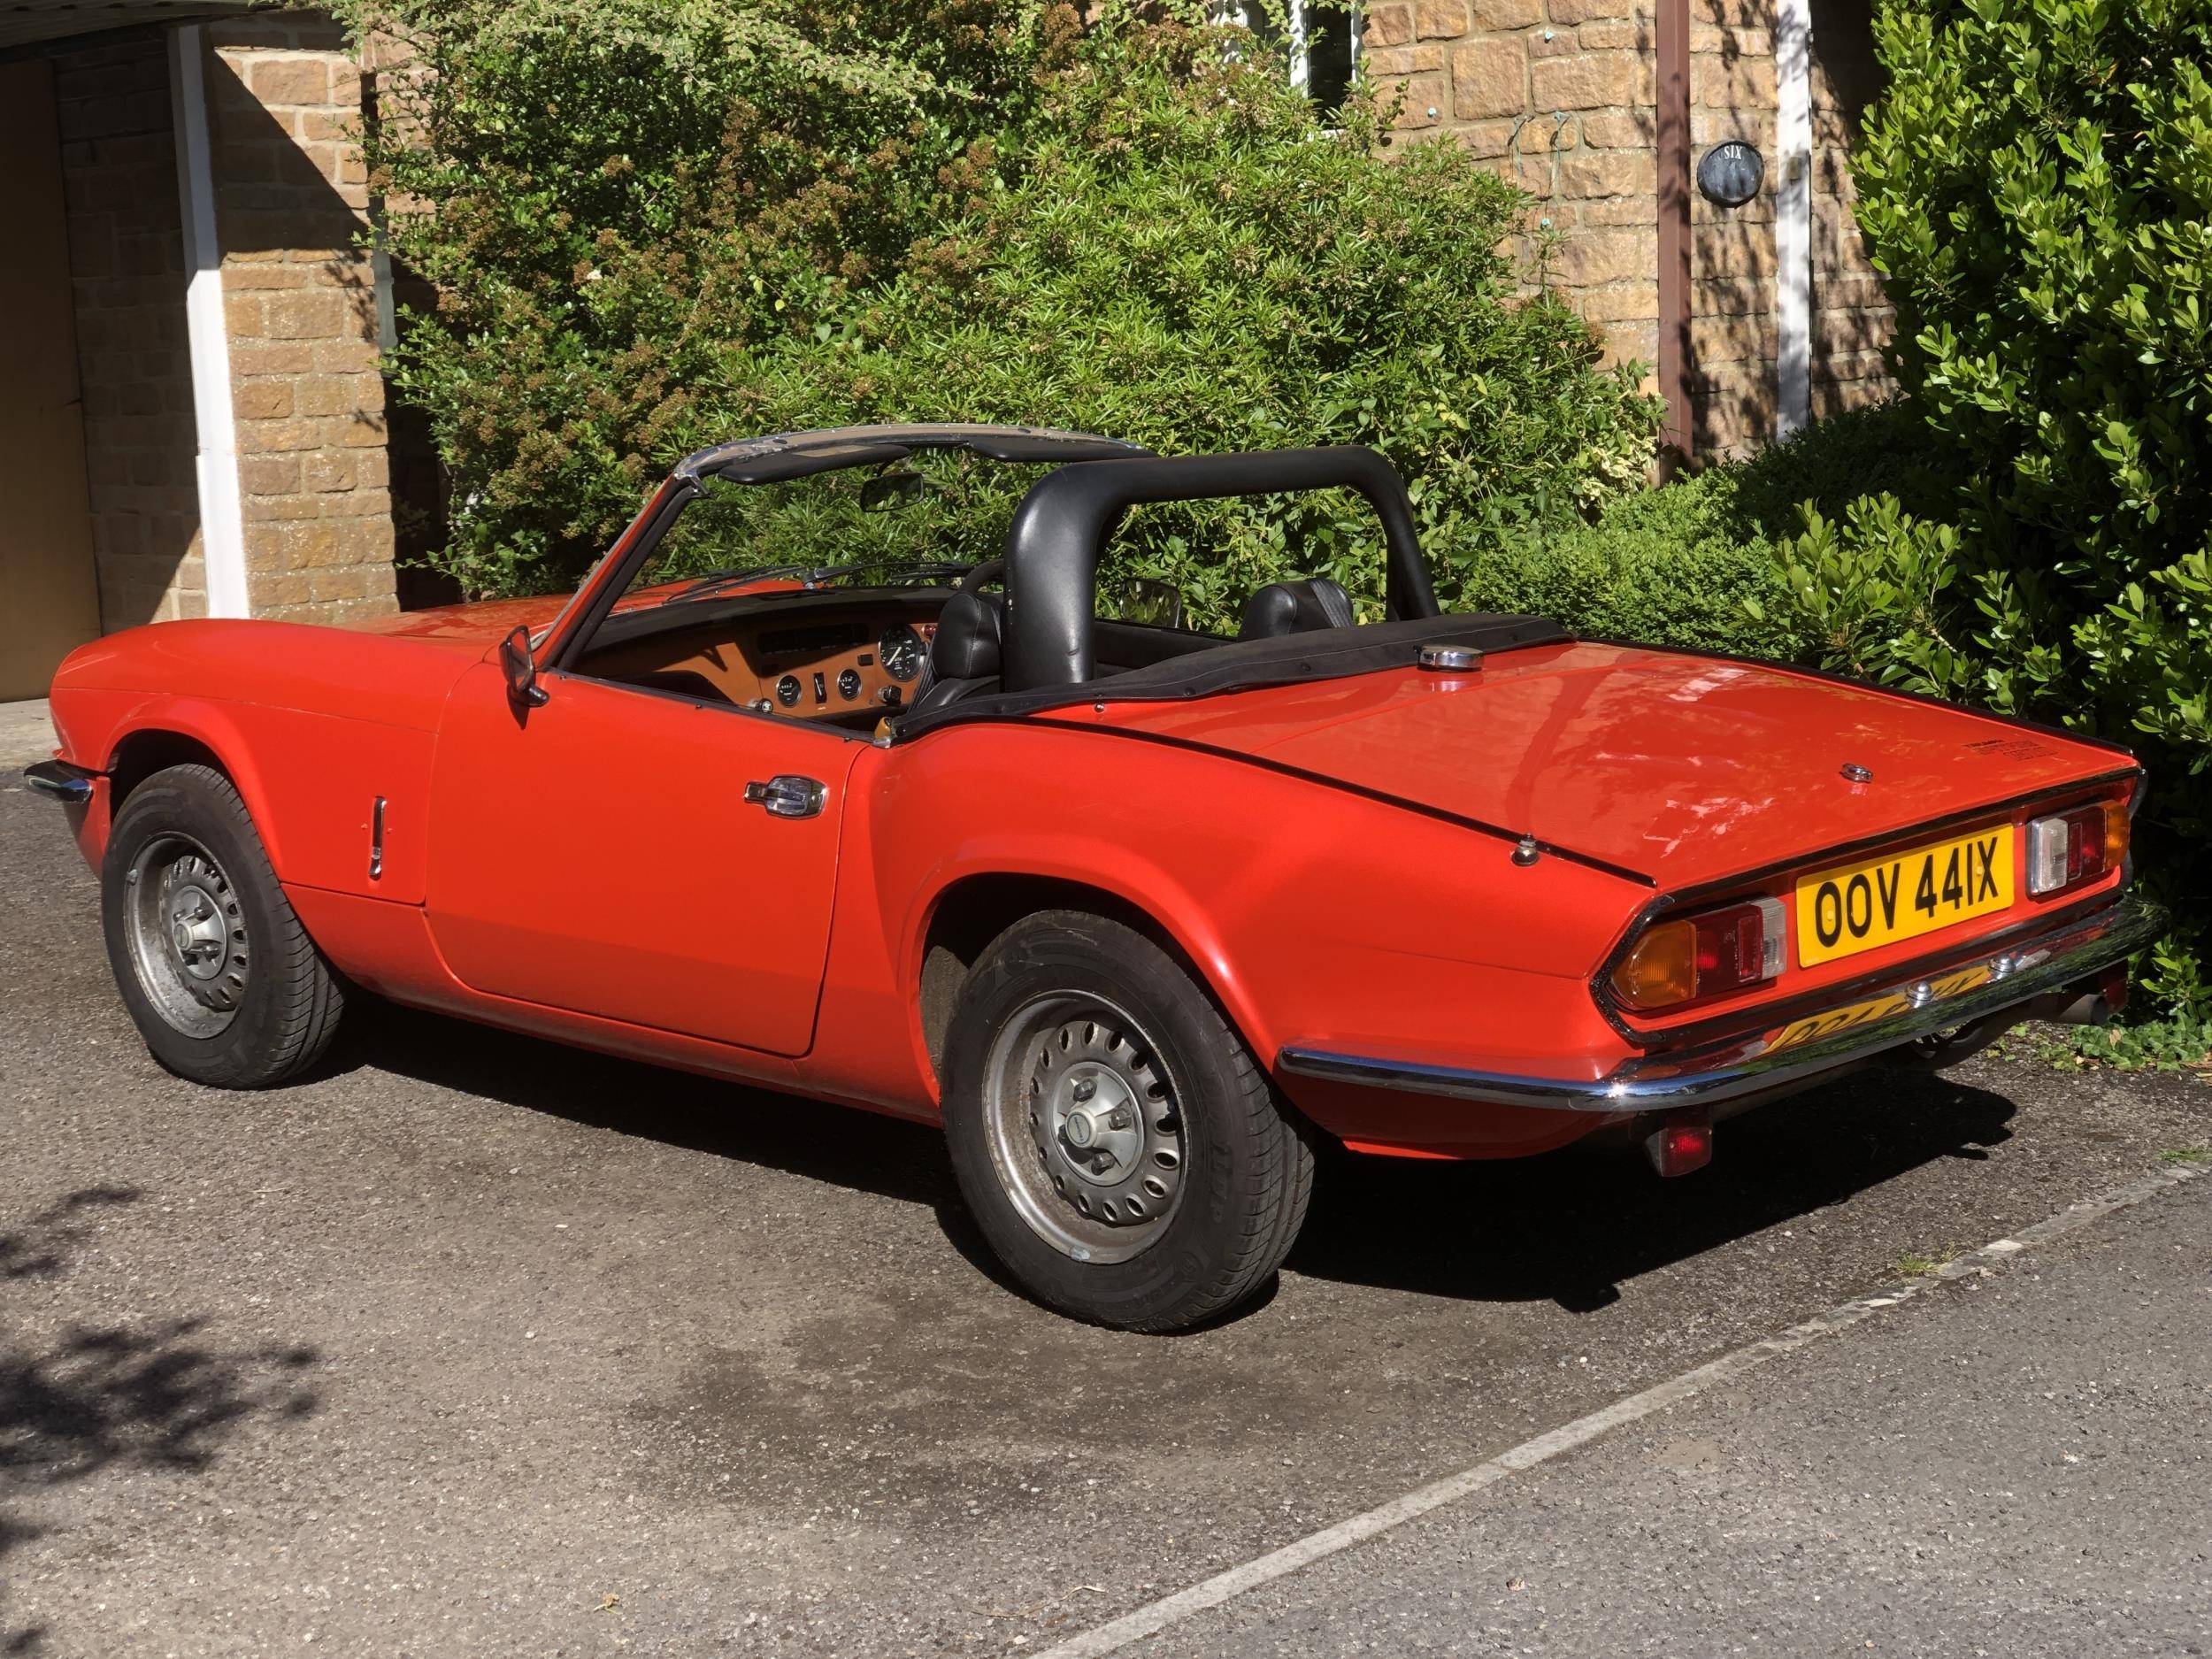 1981 Triumph Spitfire 1500 Registration number OOV 441X Chassis number TFADW1AT009713 Engine - Image 2 of 57